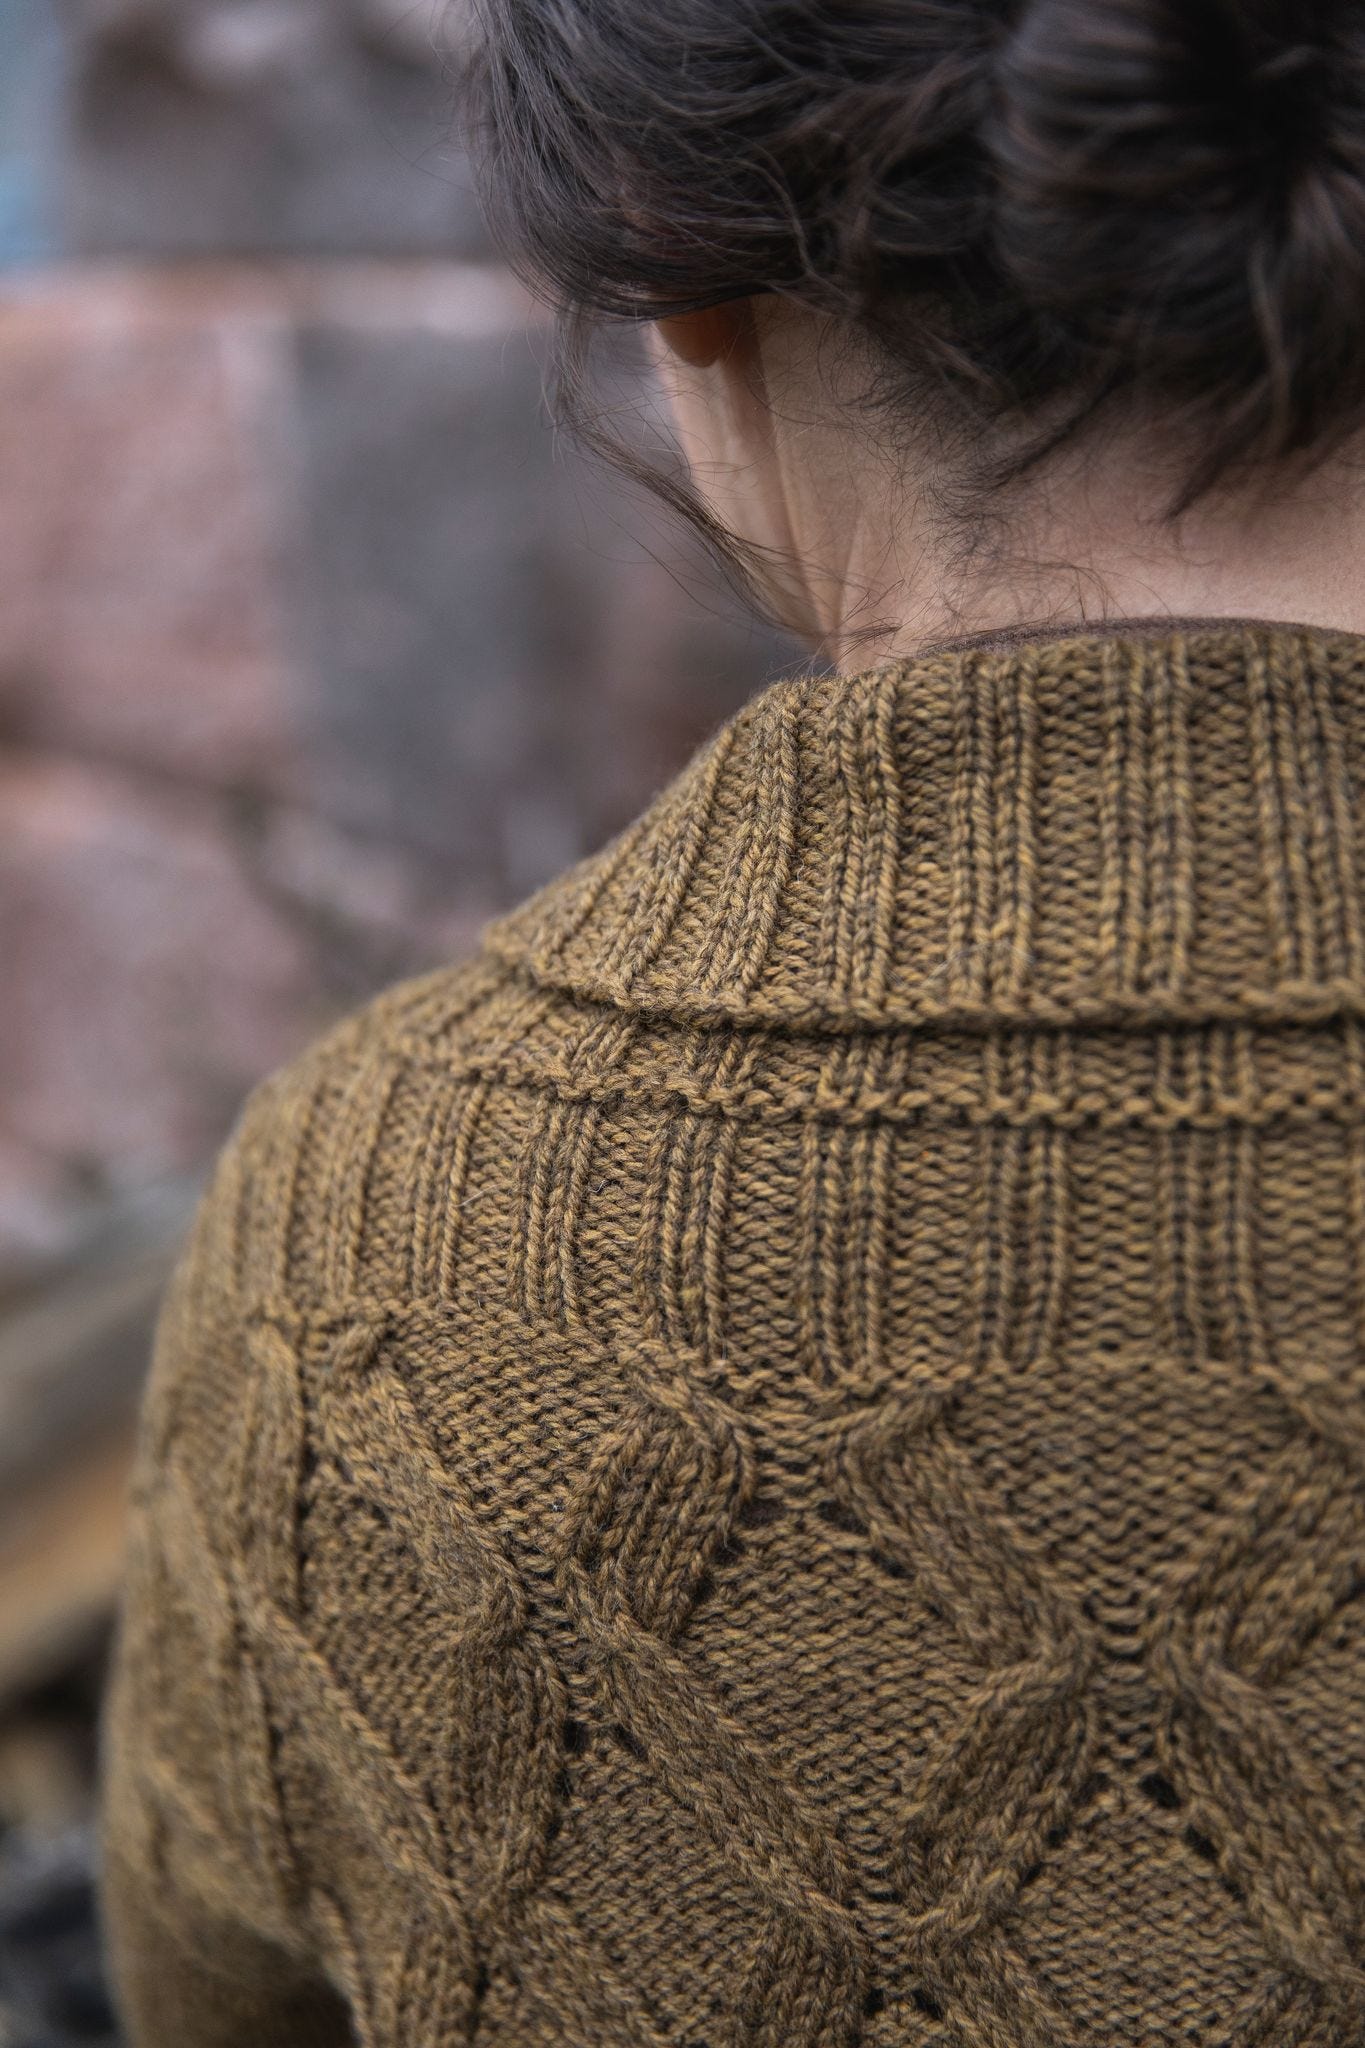 A partial view of a woman's back. Her dark hair is pulled up and she looks down to the left. Her cardigan features a cabled criss-cross motif and a very wide ribbed collar that is folded over. The sweater is a dark bronze color.